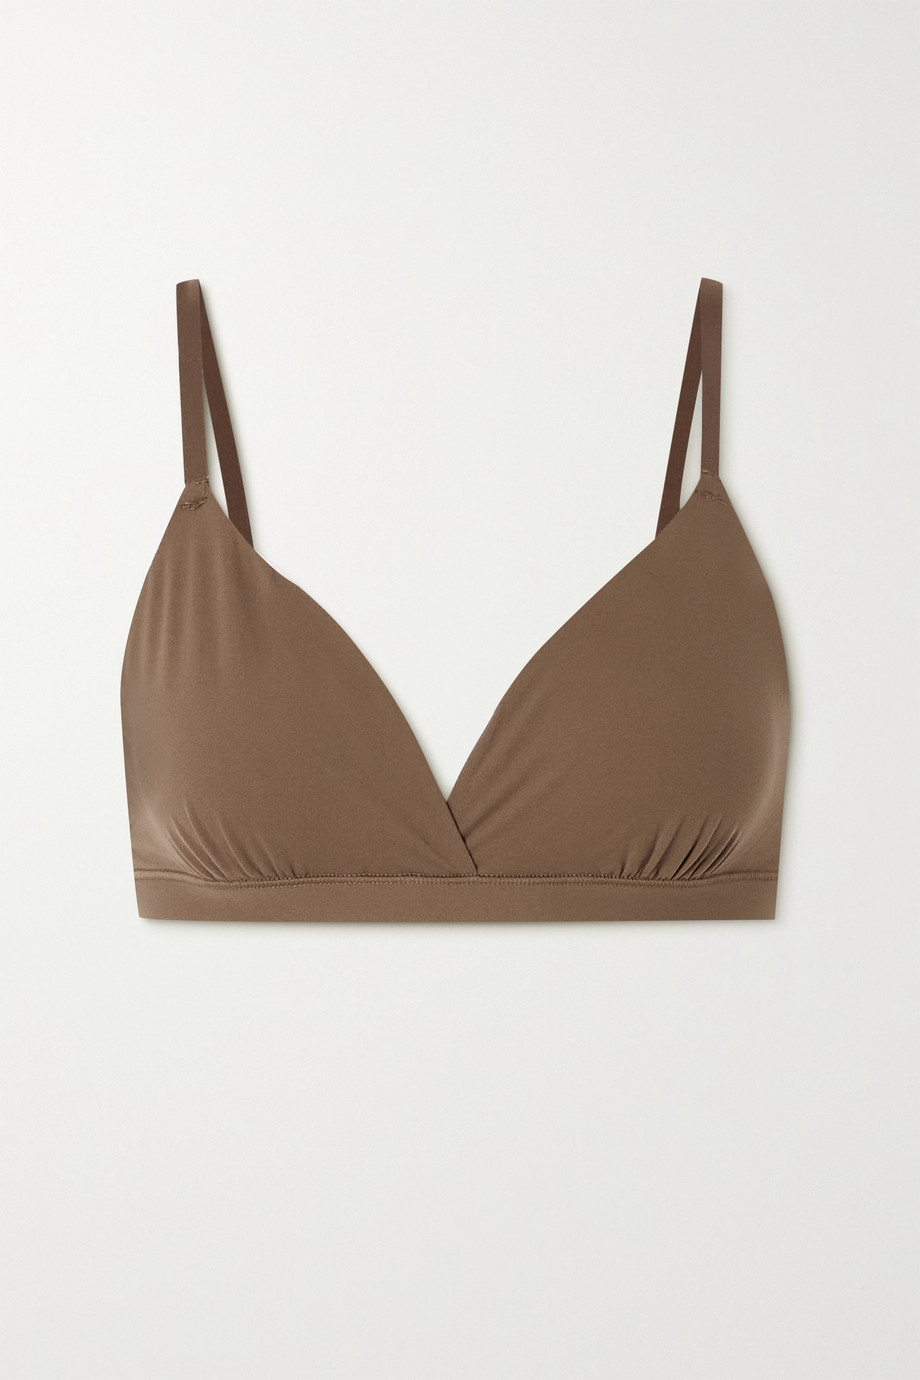 Skims + Fits Everybody Wrap-Effect Triangle Bralette